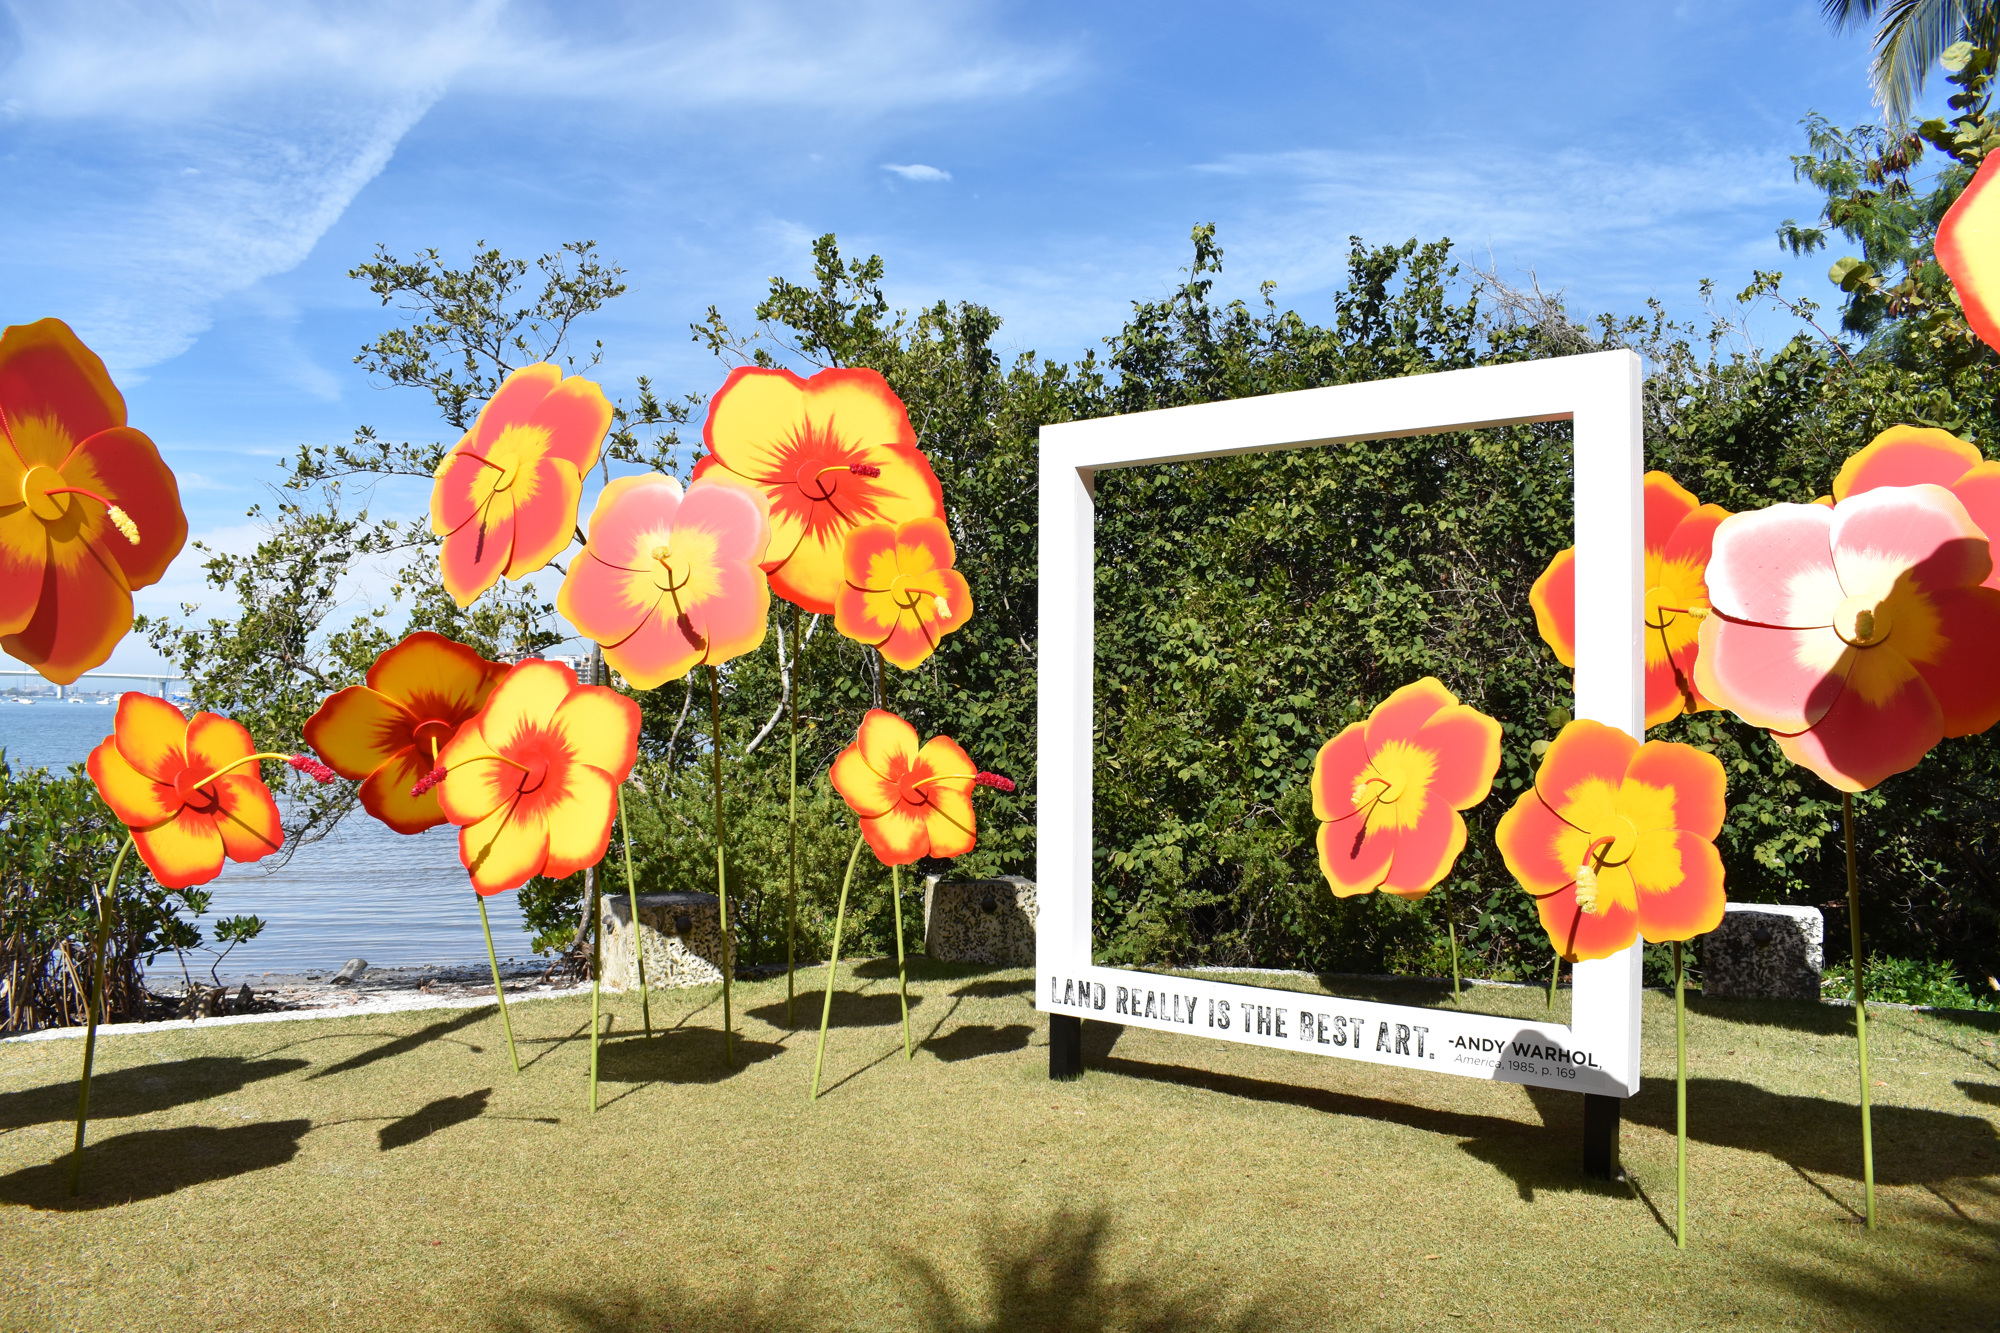 Oversize, fabricated hibiscus flowers provide a colorful, waterfront scene that celebrates nature as art. Photo by Niki Kottmann